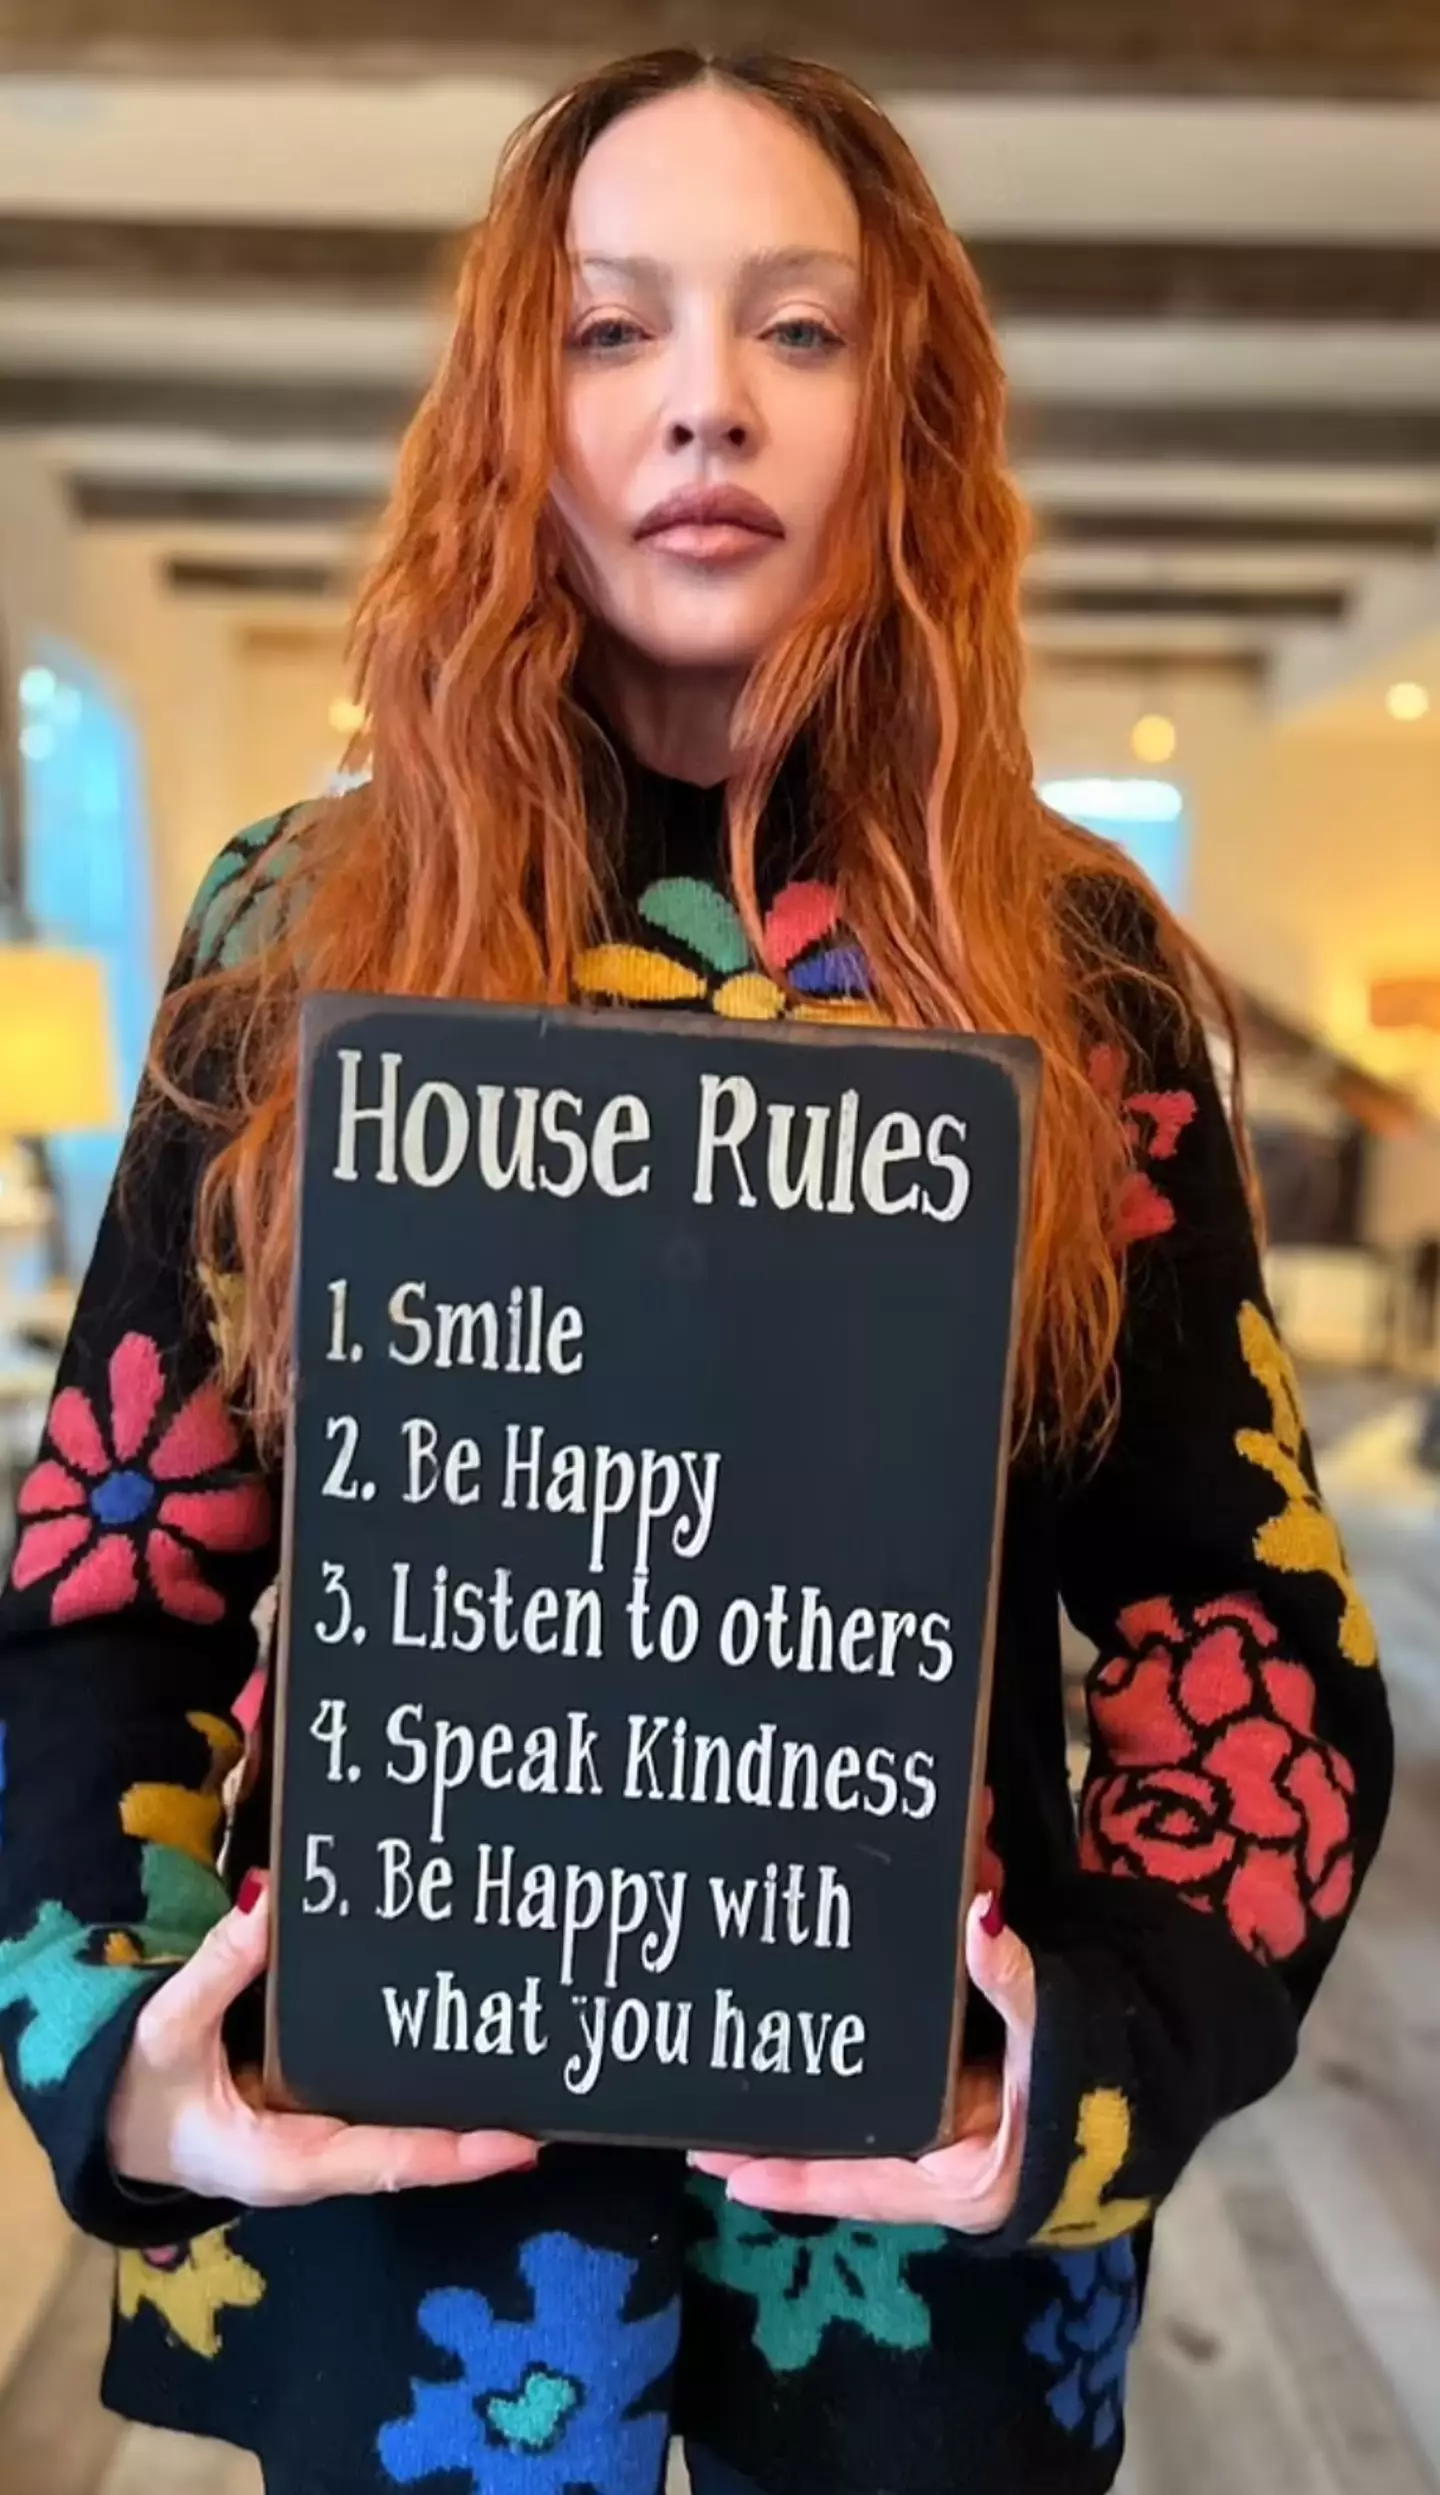 Madonna shared her 'House Rules' on Instagram.